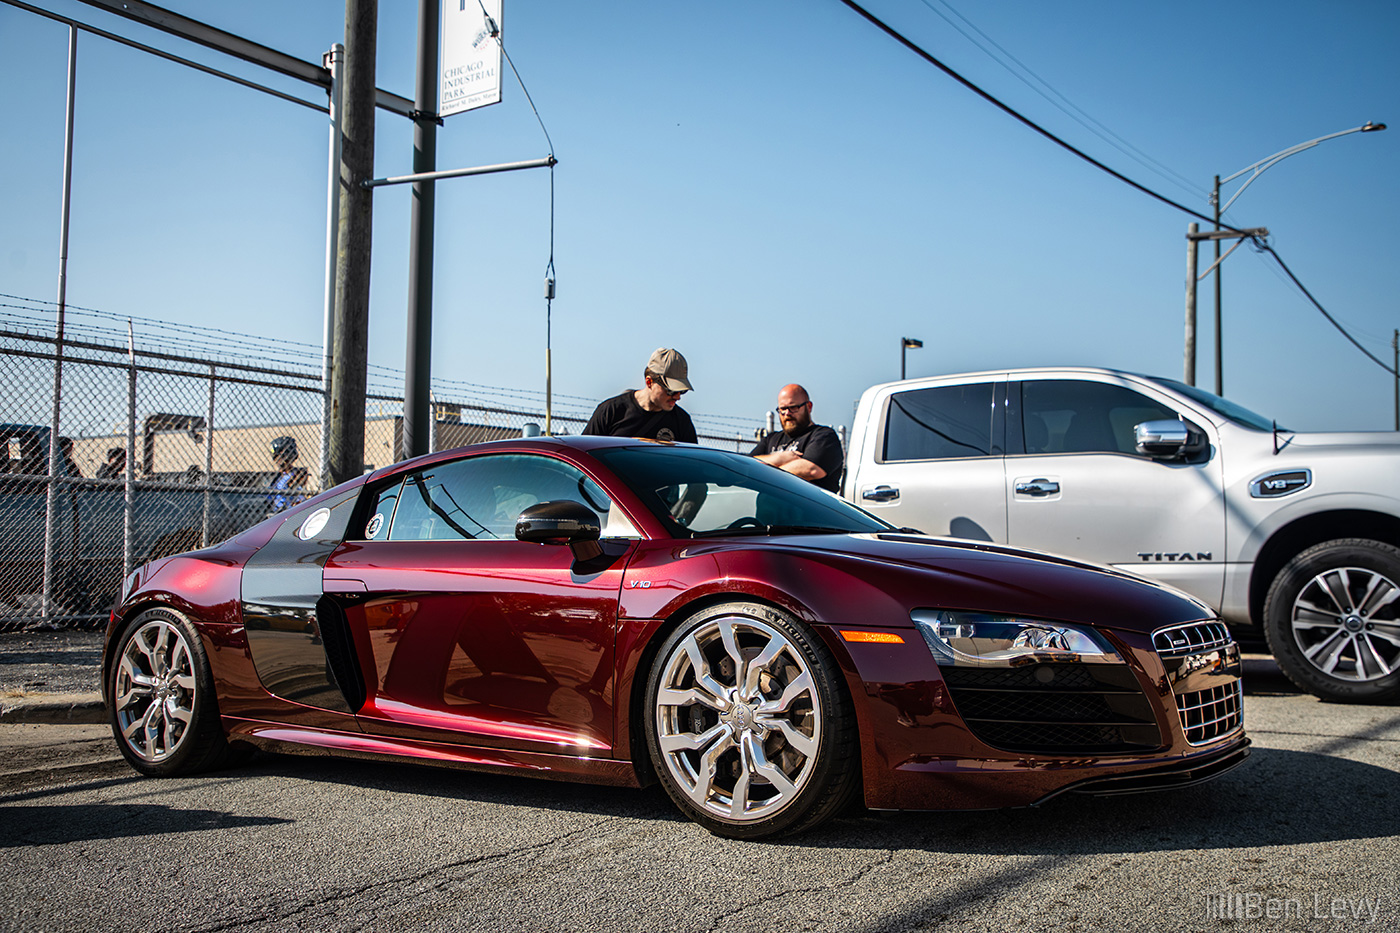 Classic Red Pearl Effect Audi R8 V10 in Chicago